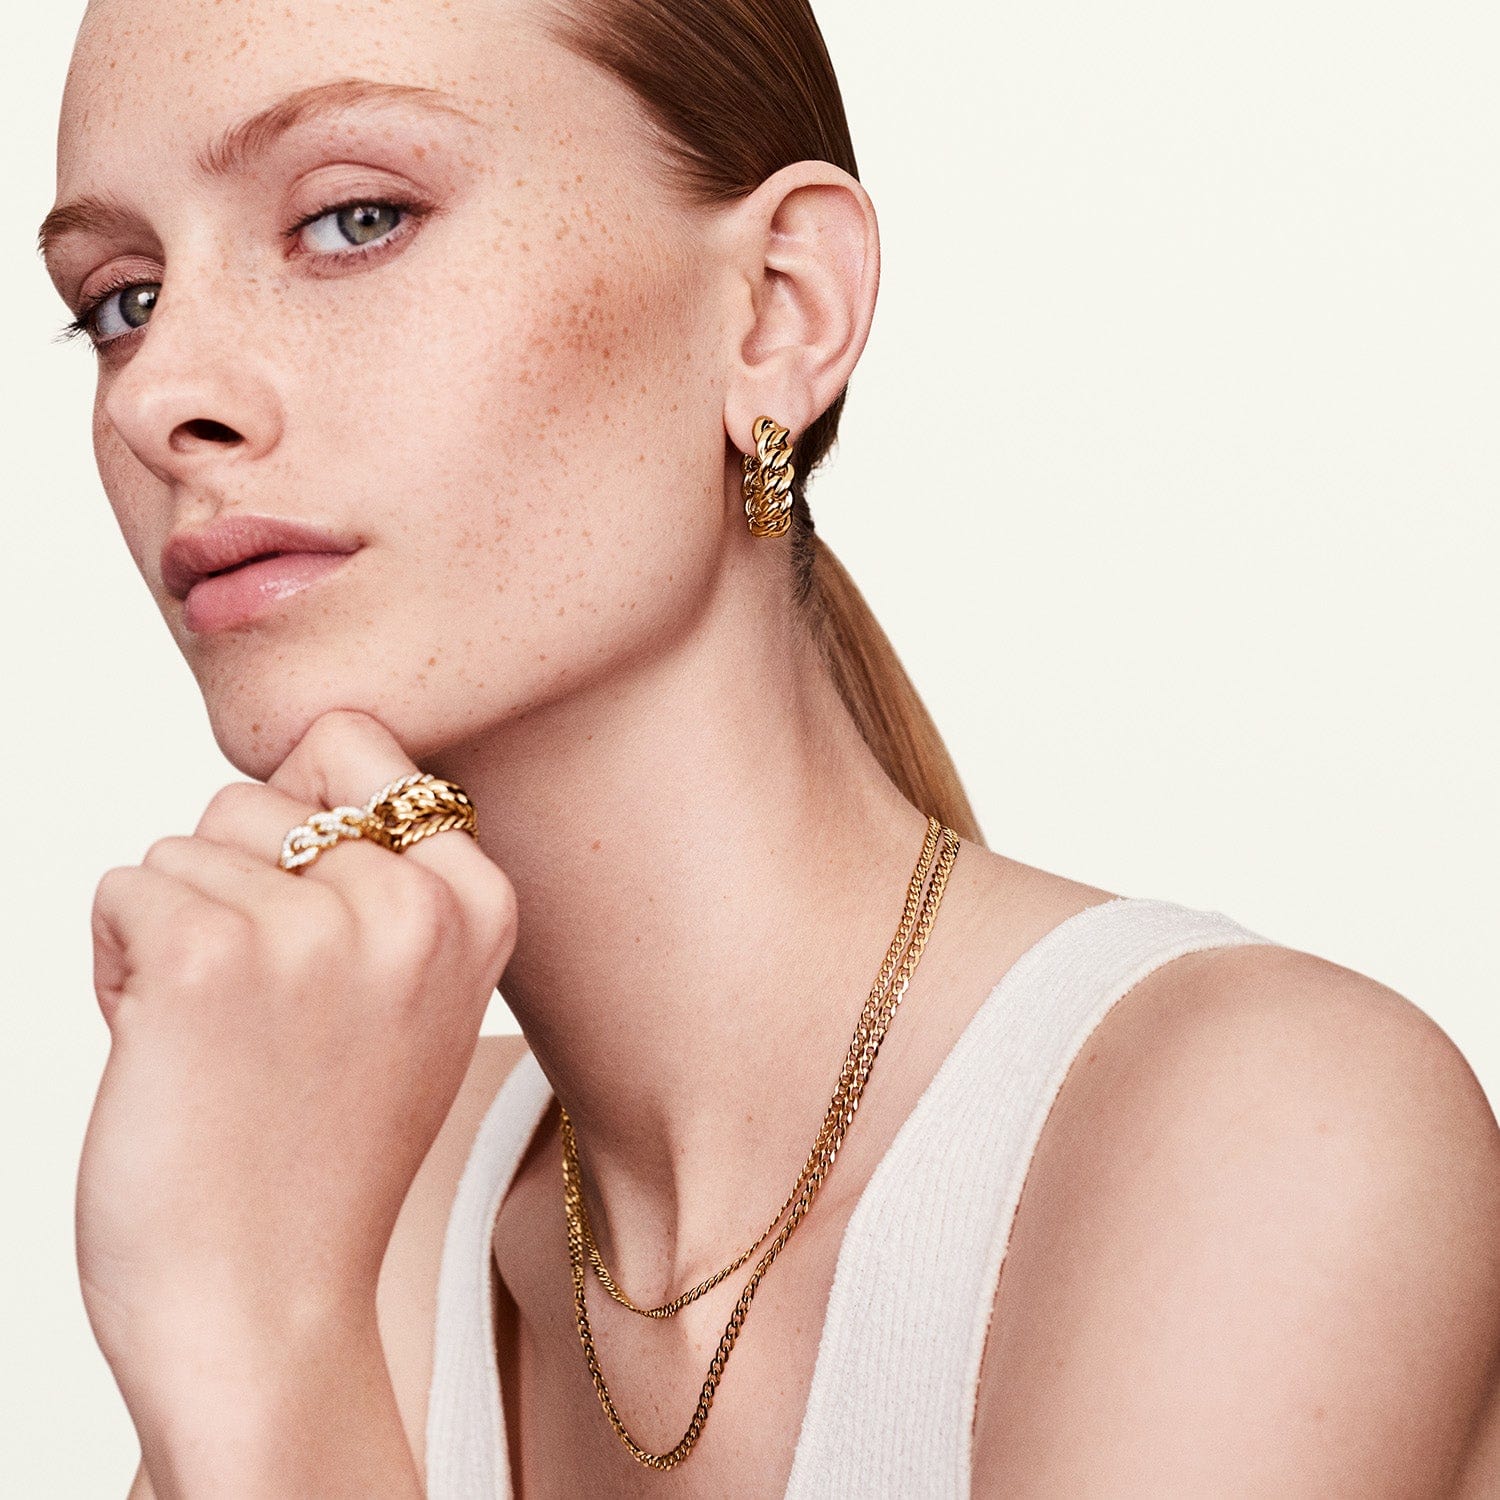 Model wearing gold chain hoop earrings with matching jewelry